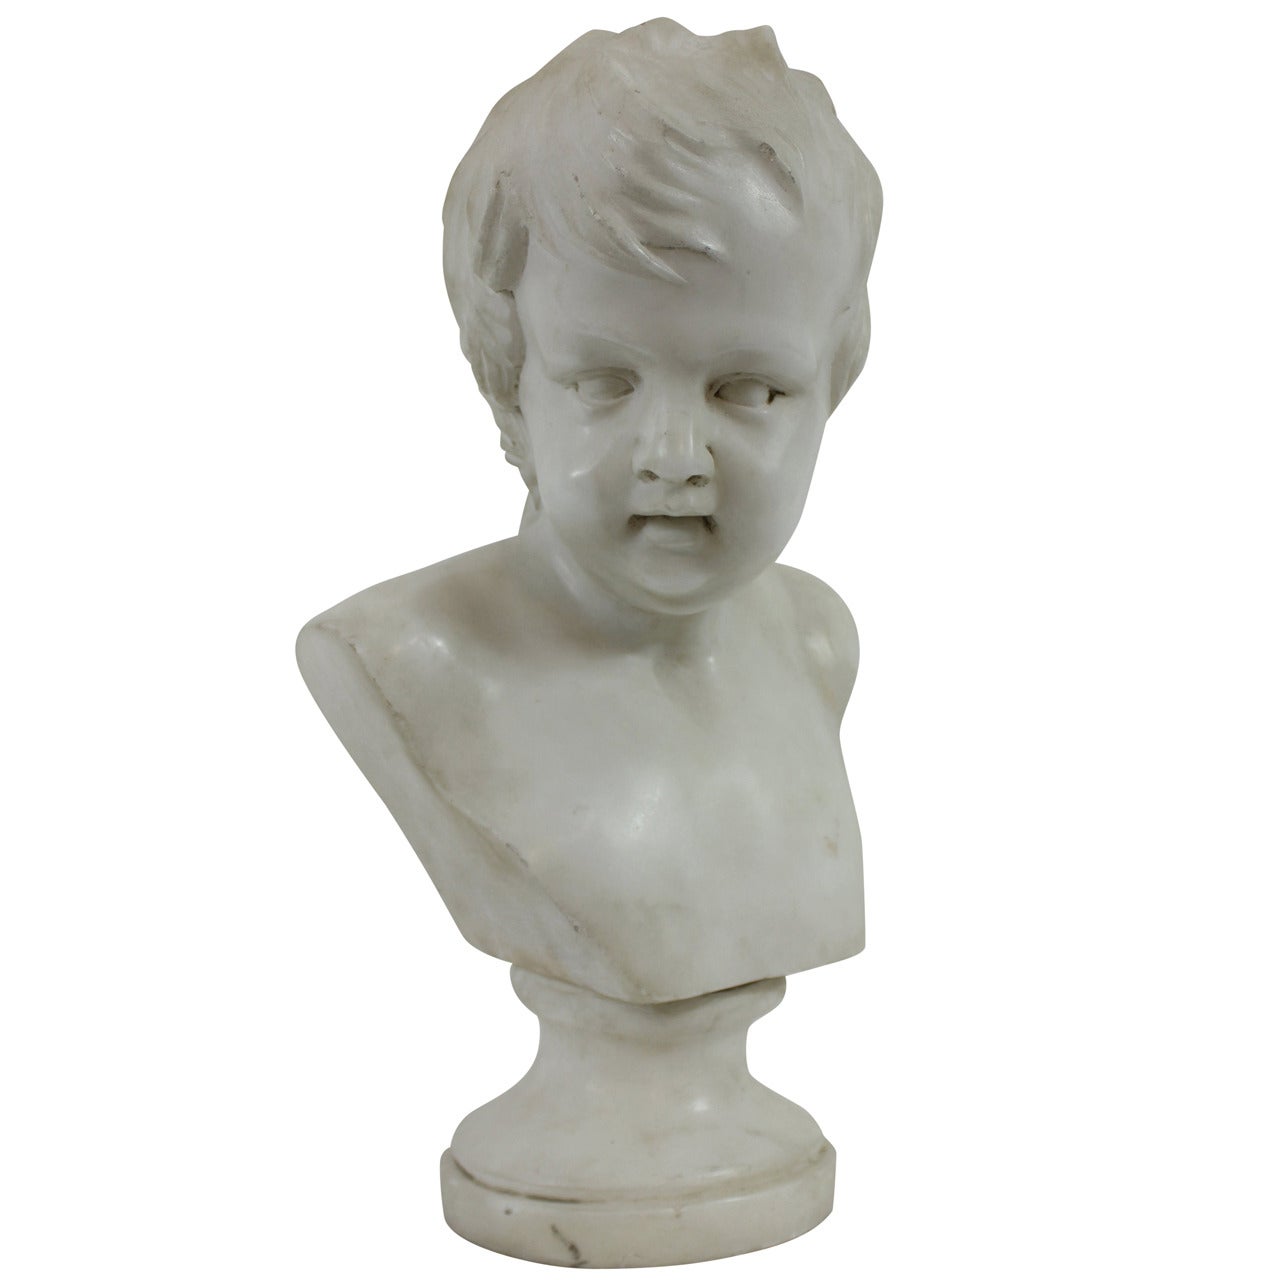 A Fine English Regency Marble Bust Of A Young Boy